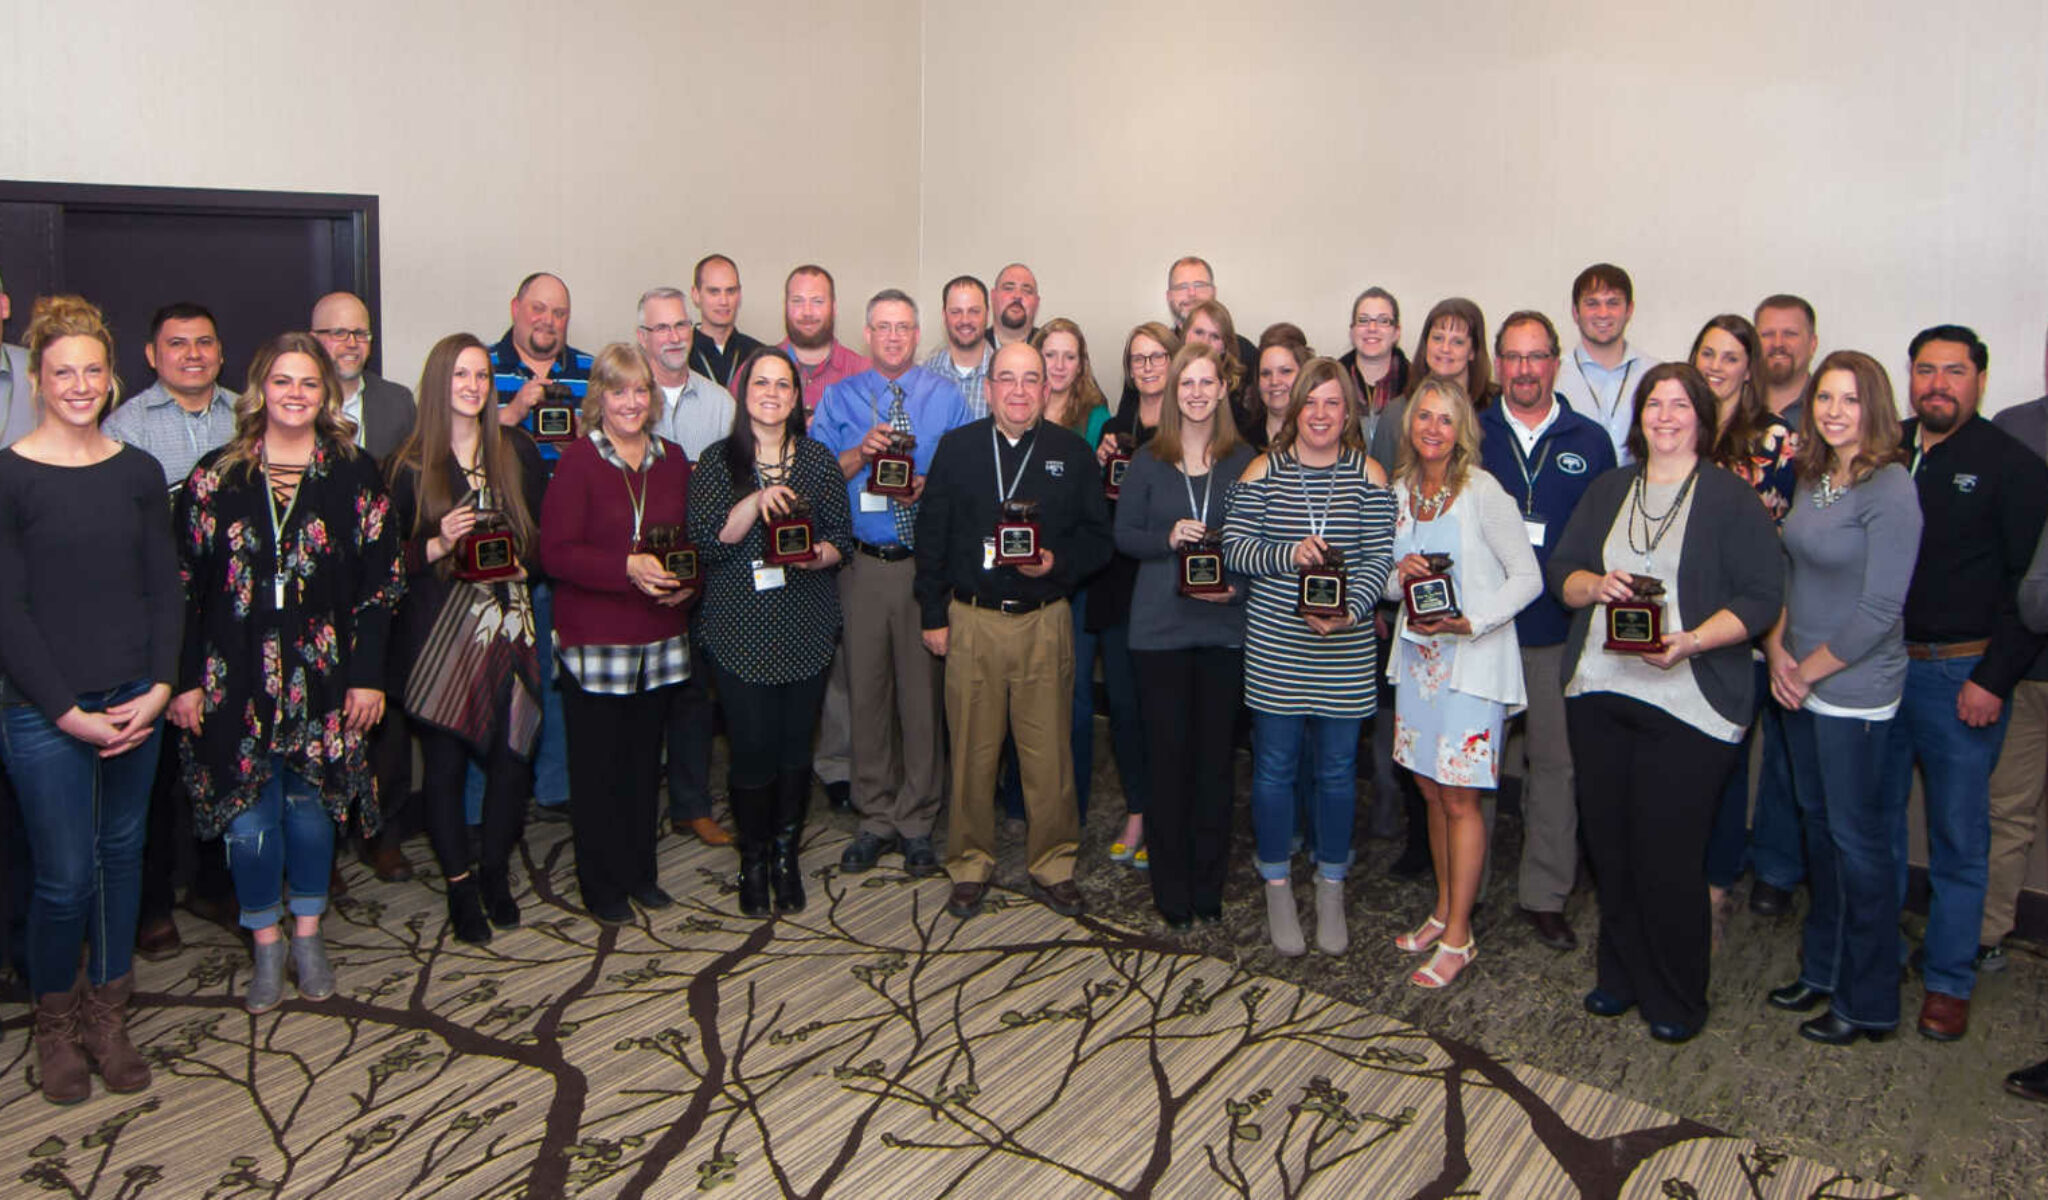 Christensen Farms hosts its 4th annual organizational awards event